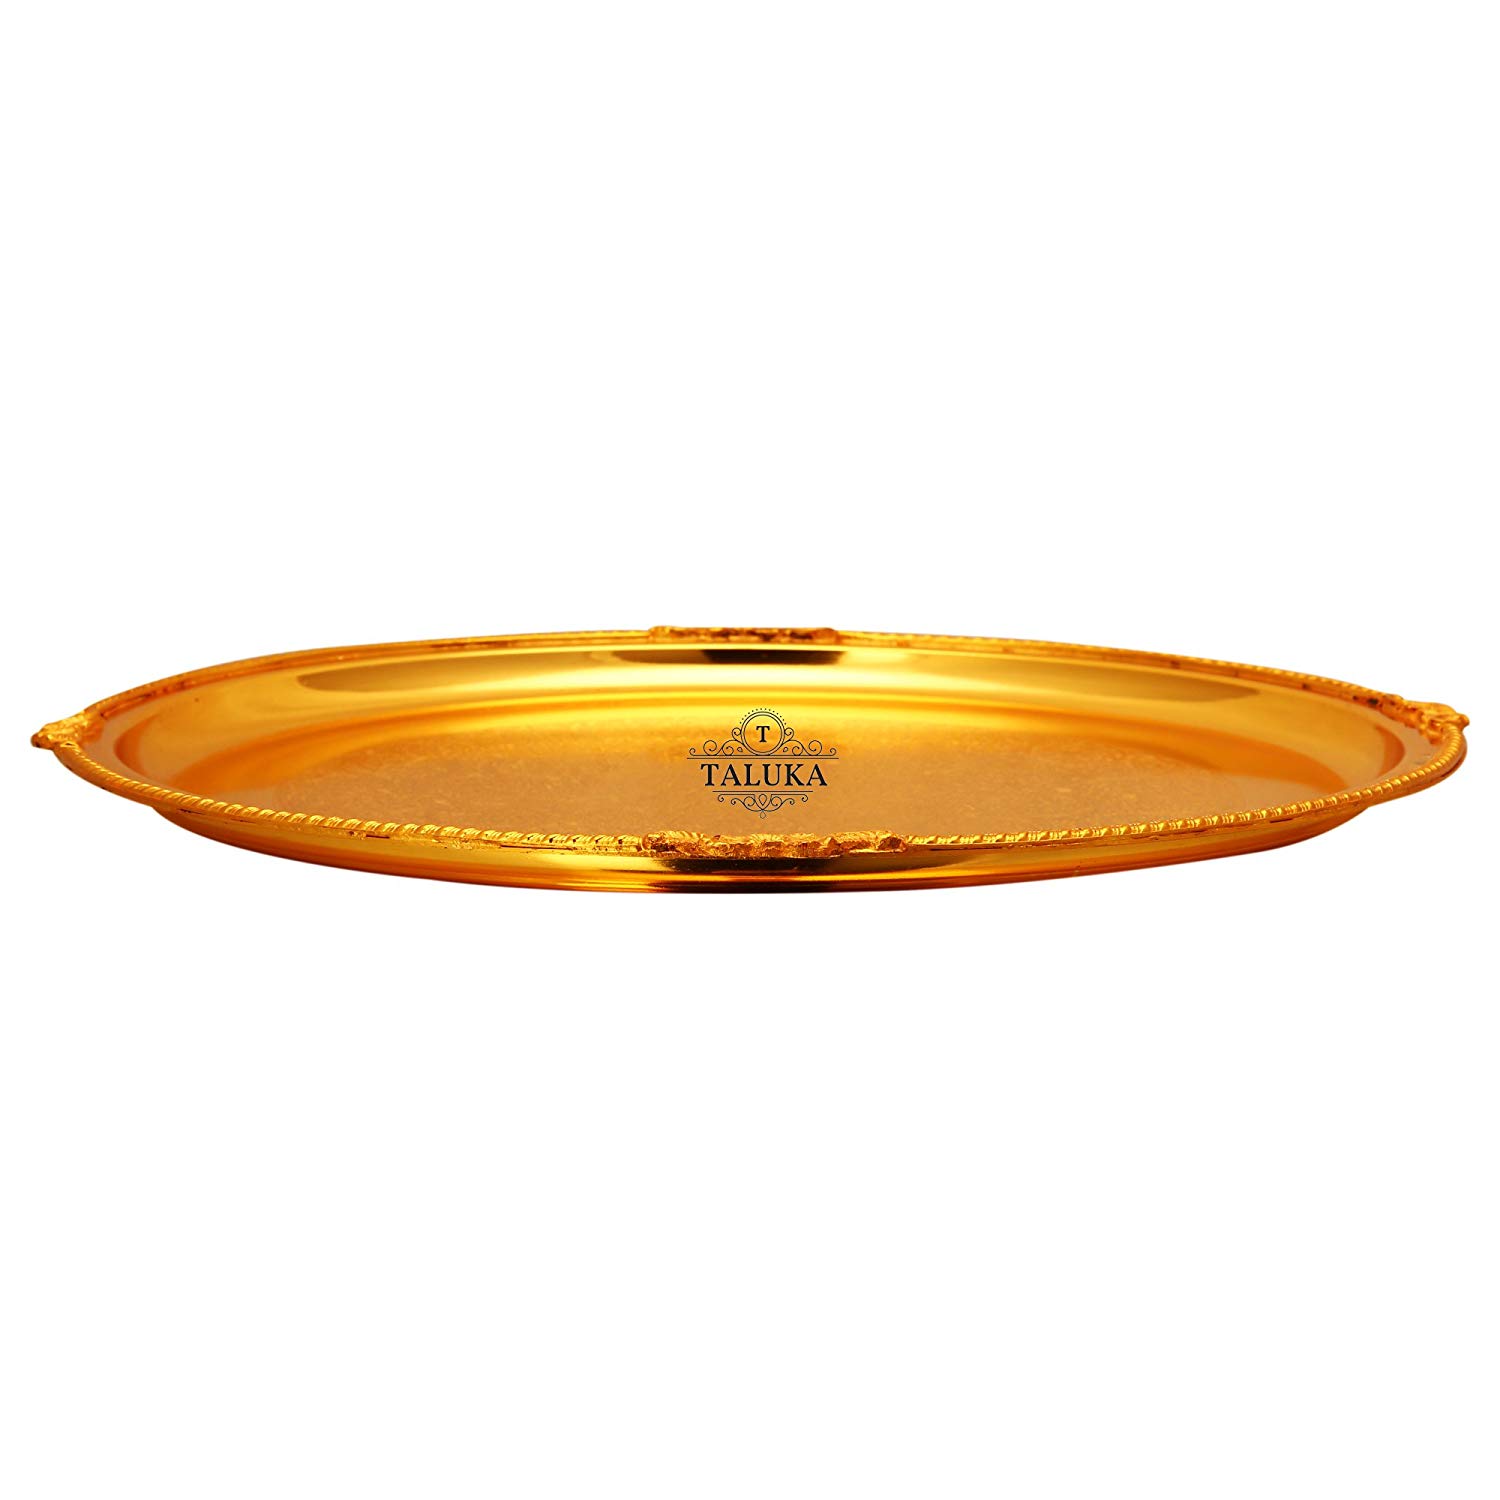 Brass Tray Serving Tray / Plate / Charger Round shape Elegant Royal Look